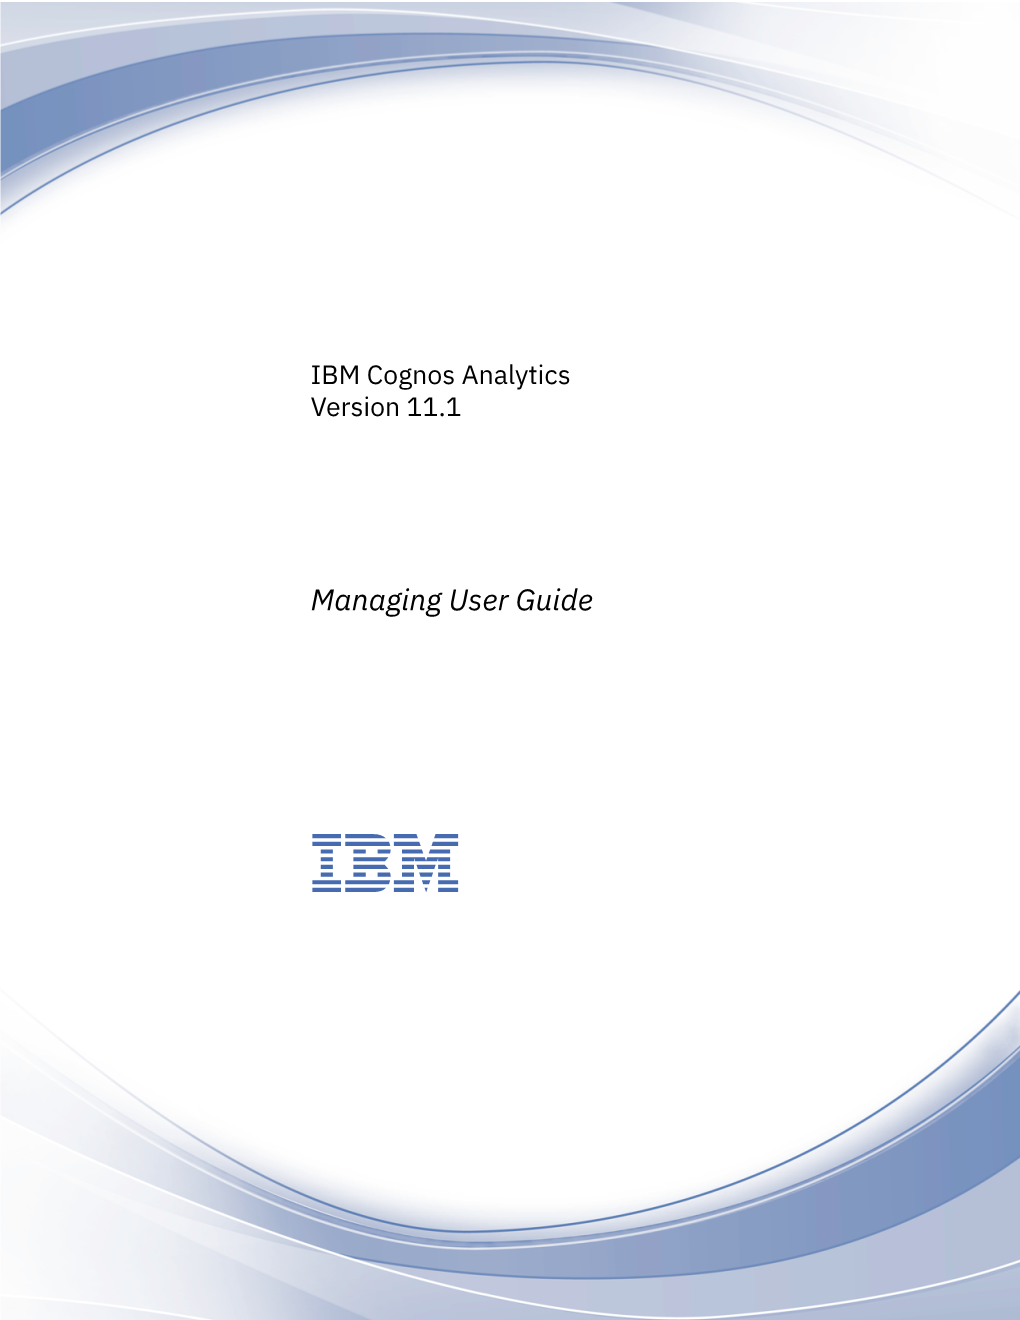 IBM Cognos Analytics Version 11.1: Managing User Guide Analytics Viewers Members Have the Same Access Permissions As Query Users and Analysis Users